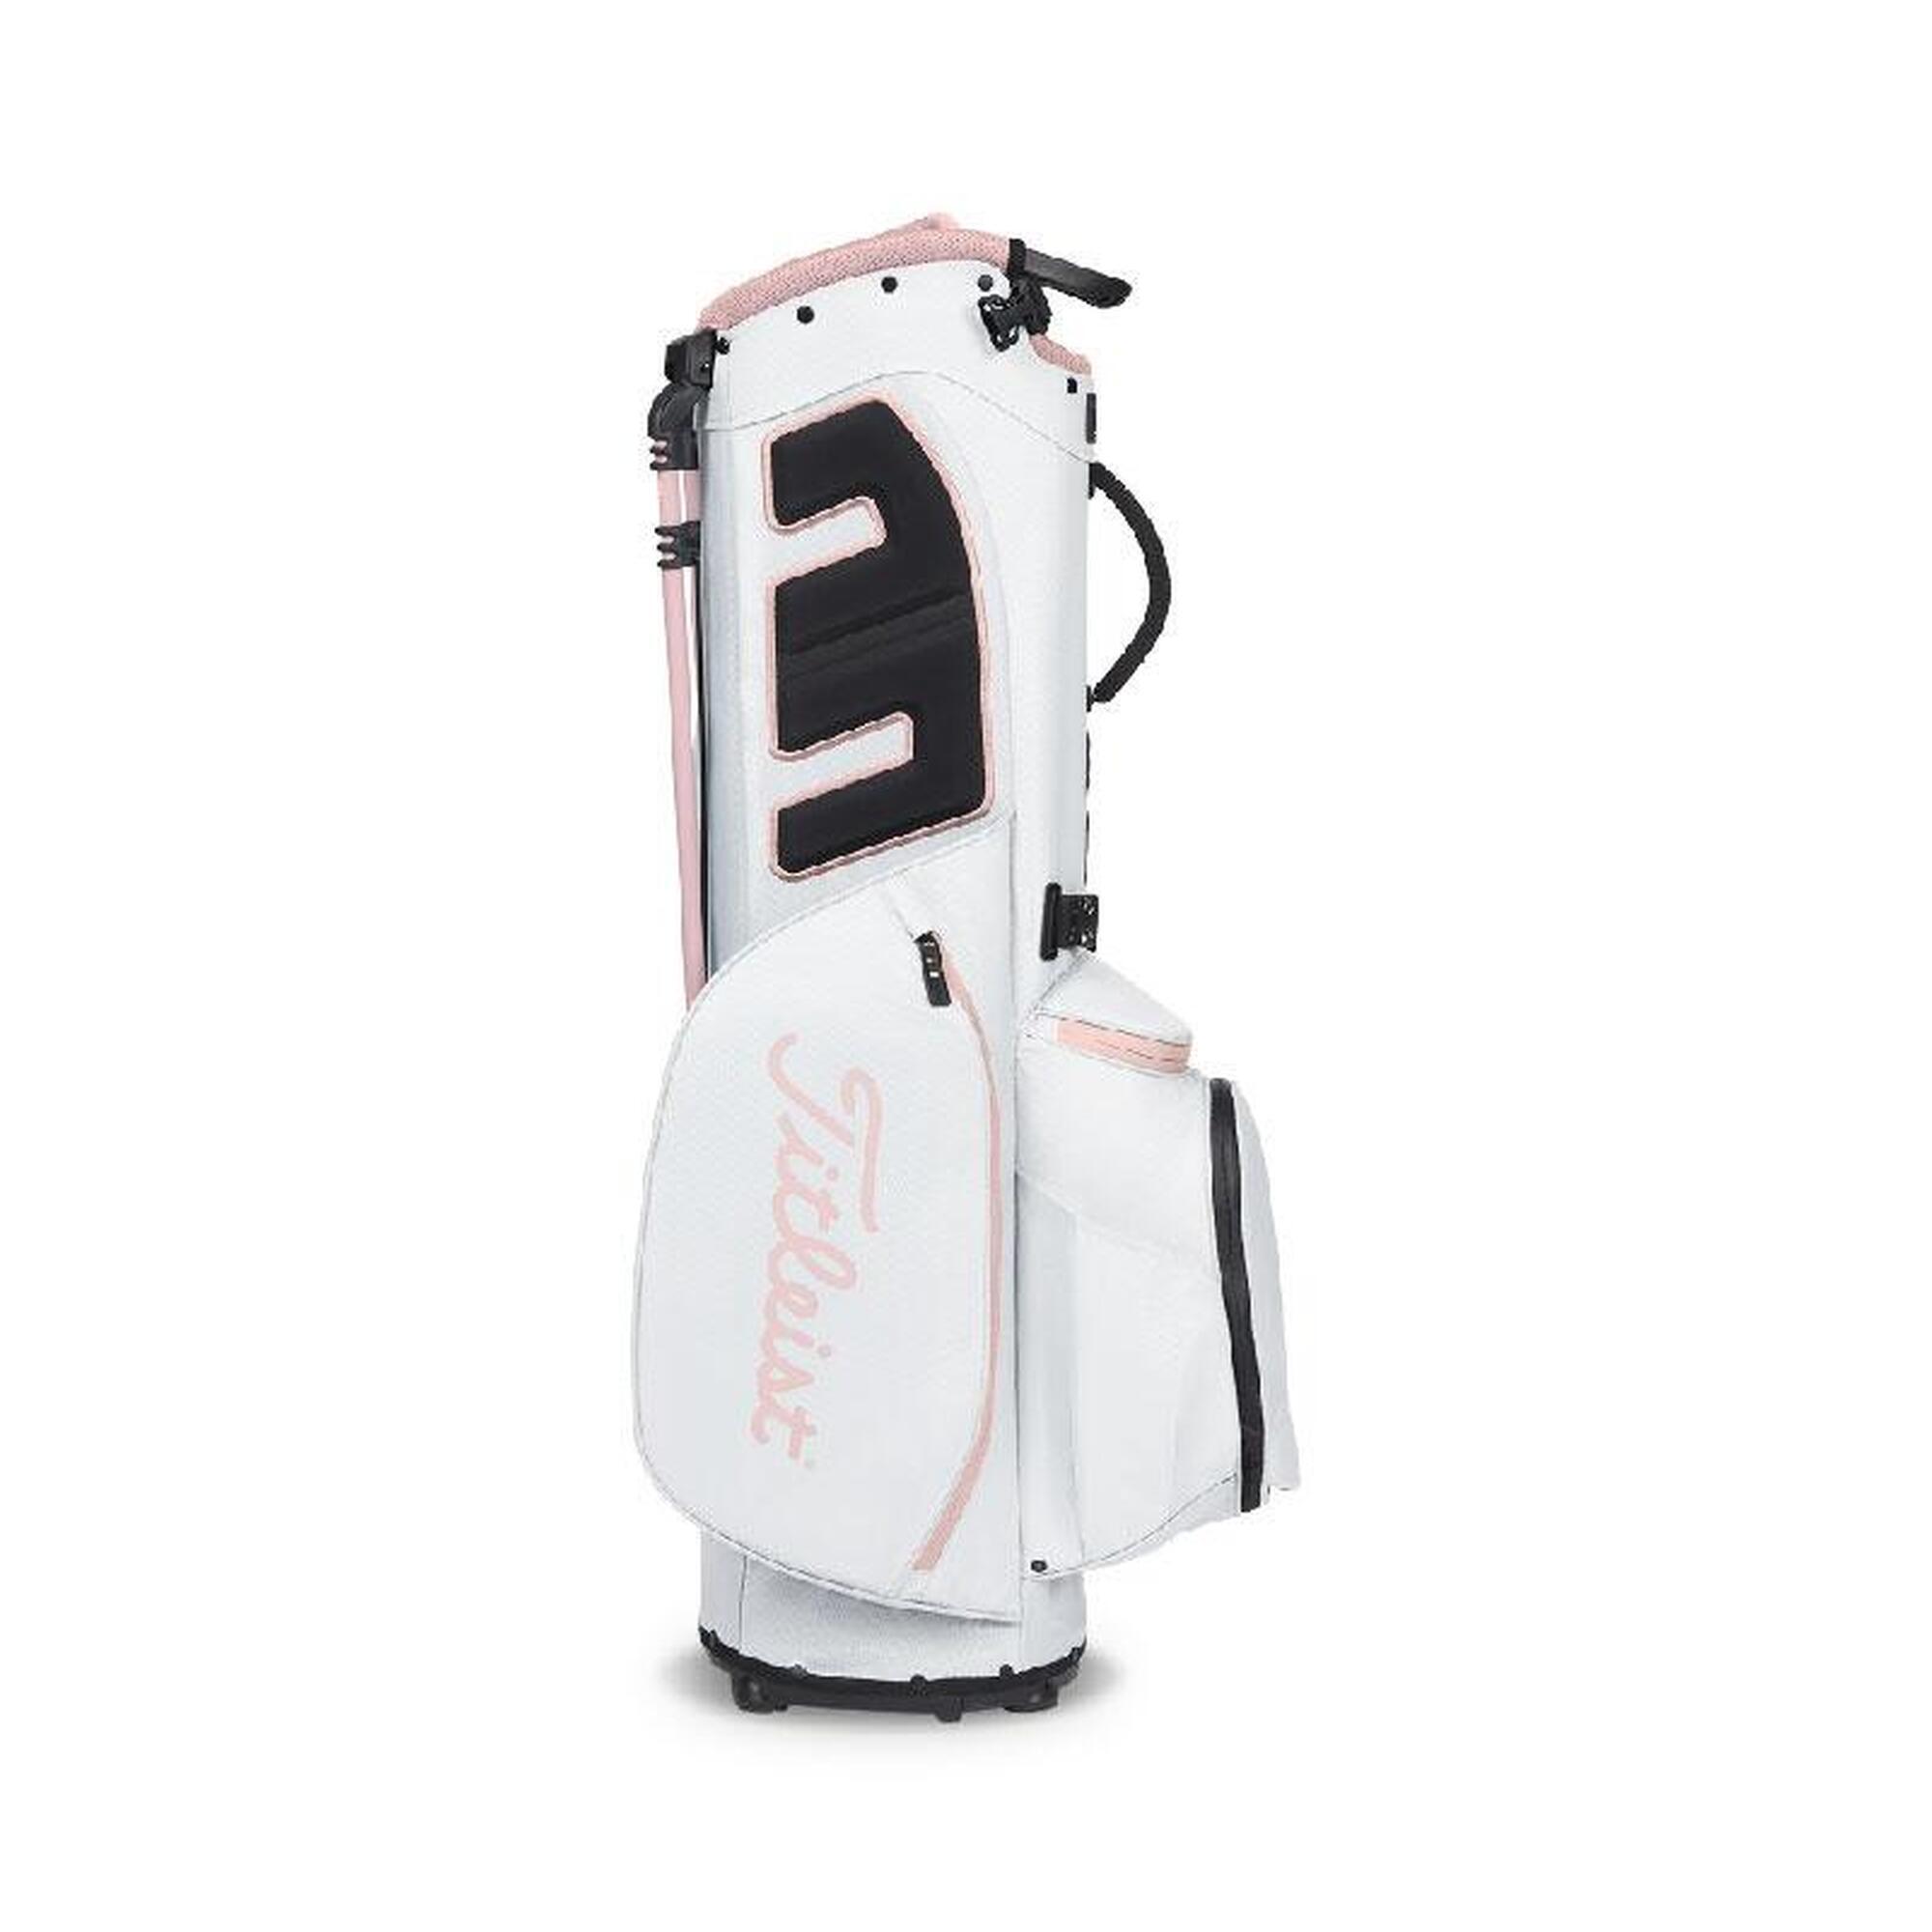 TB23SX9A-16 PLAYERS 5 "STADRY" WATERPROOF GOLF STAND BAG - WHITE/PINK